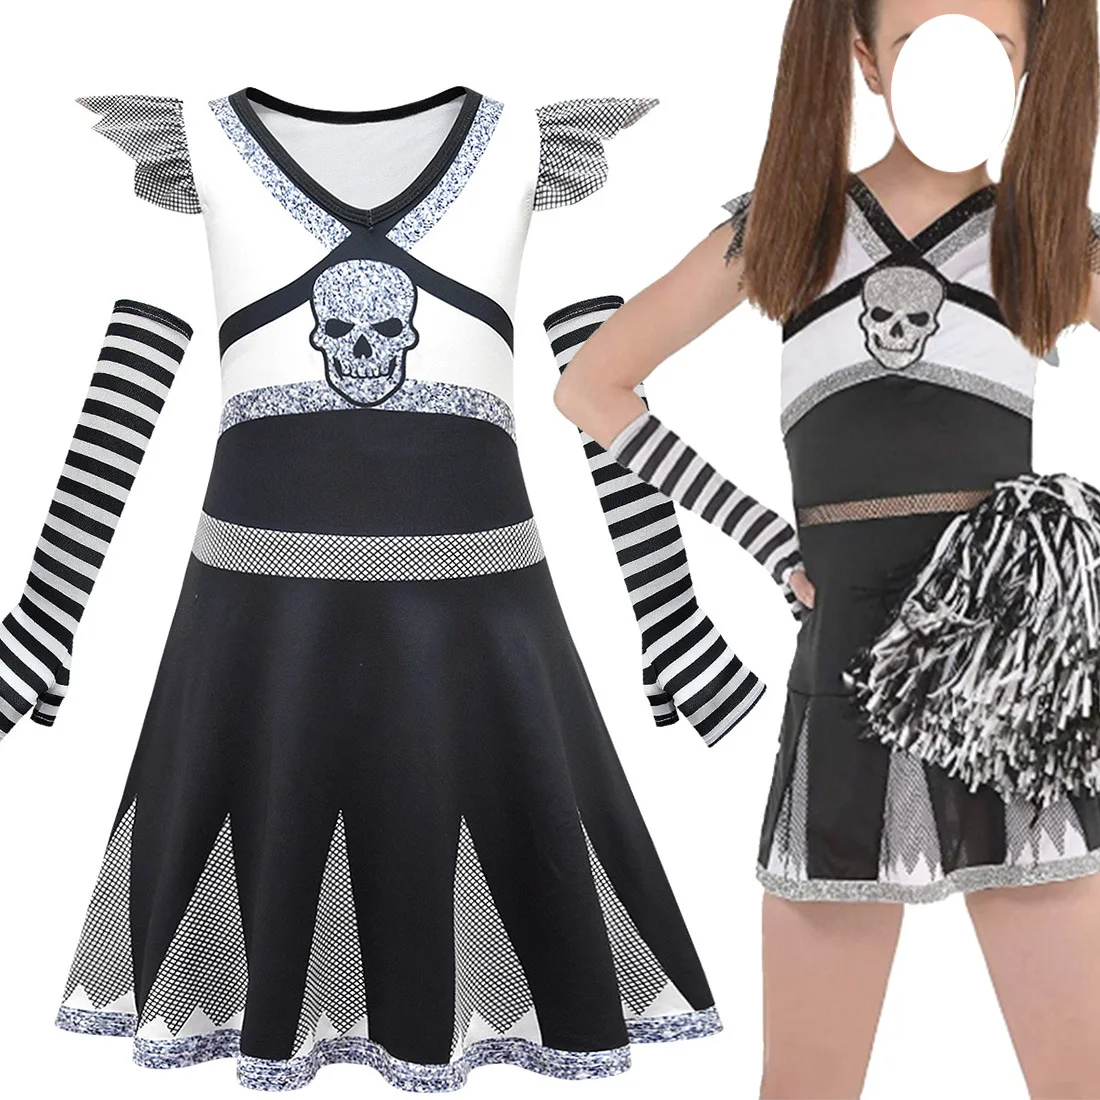 

Kids Zombies 2 Addison Cosplay Carnival Halloween Skeleton Costume for Girls Fancy Dress Cheerleader Outfits Funny Party Clothes